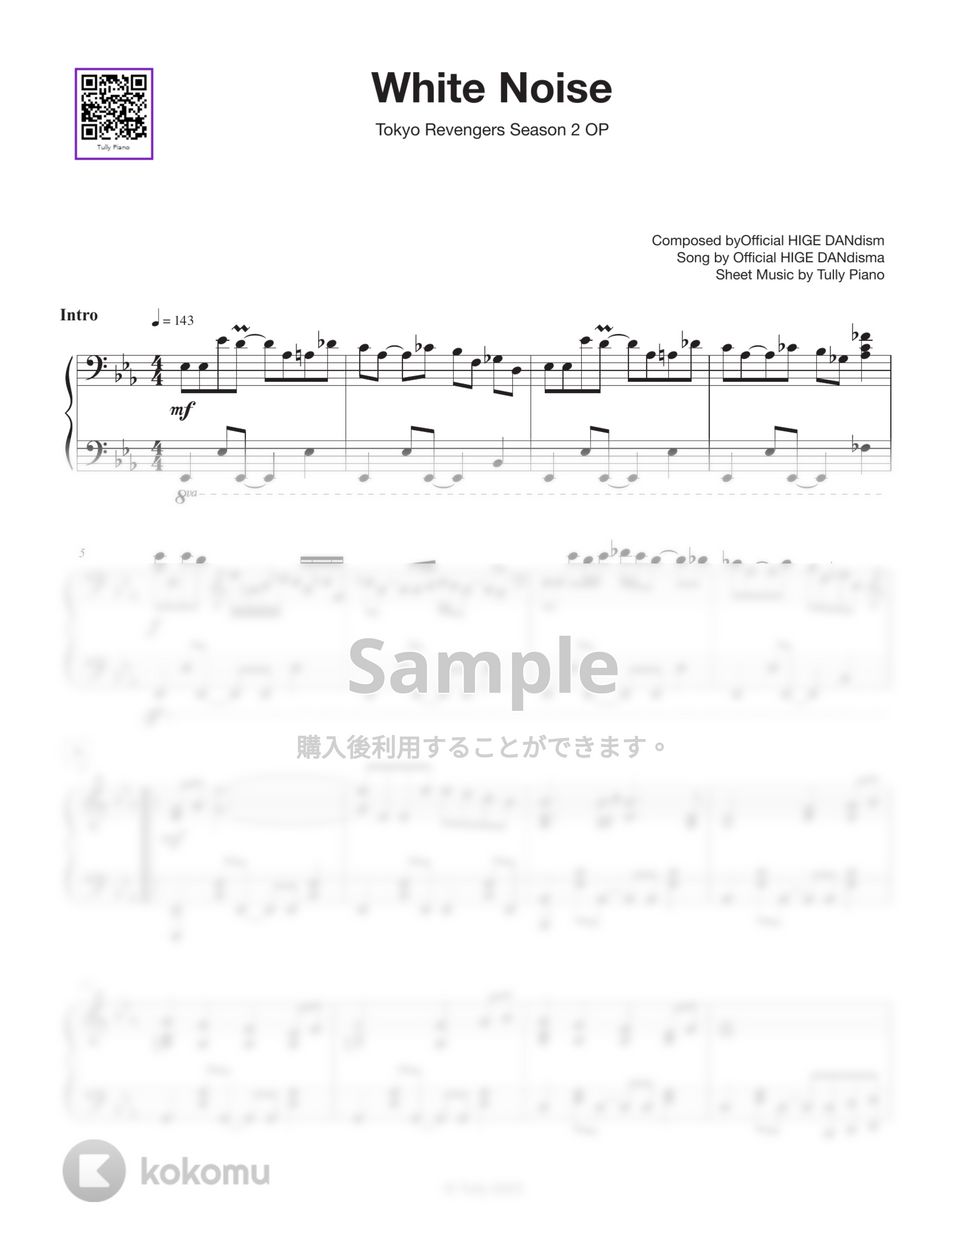 Official髭男dism - White Noise by Tully Piano